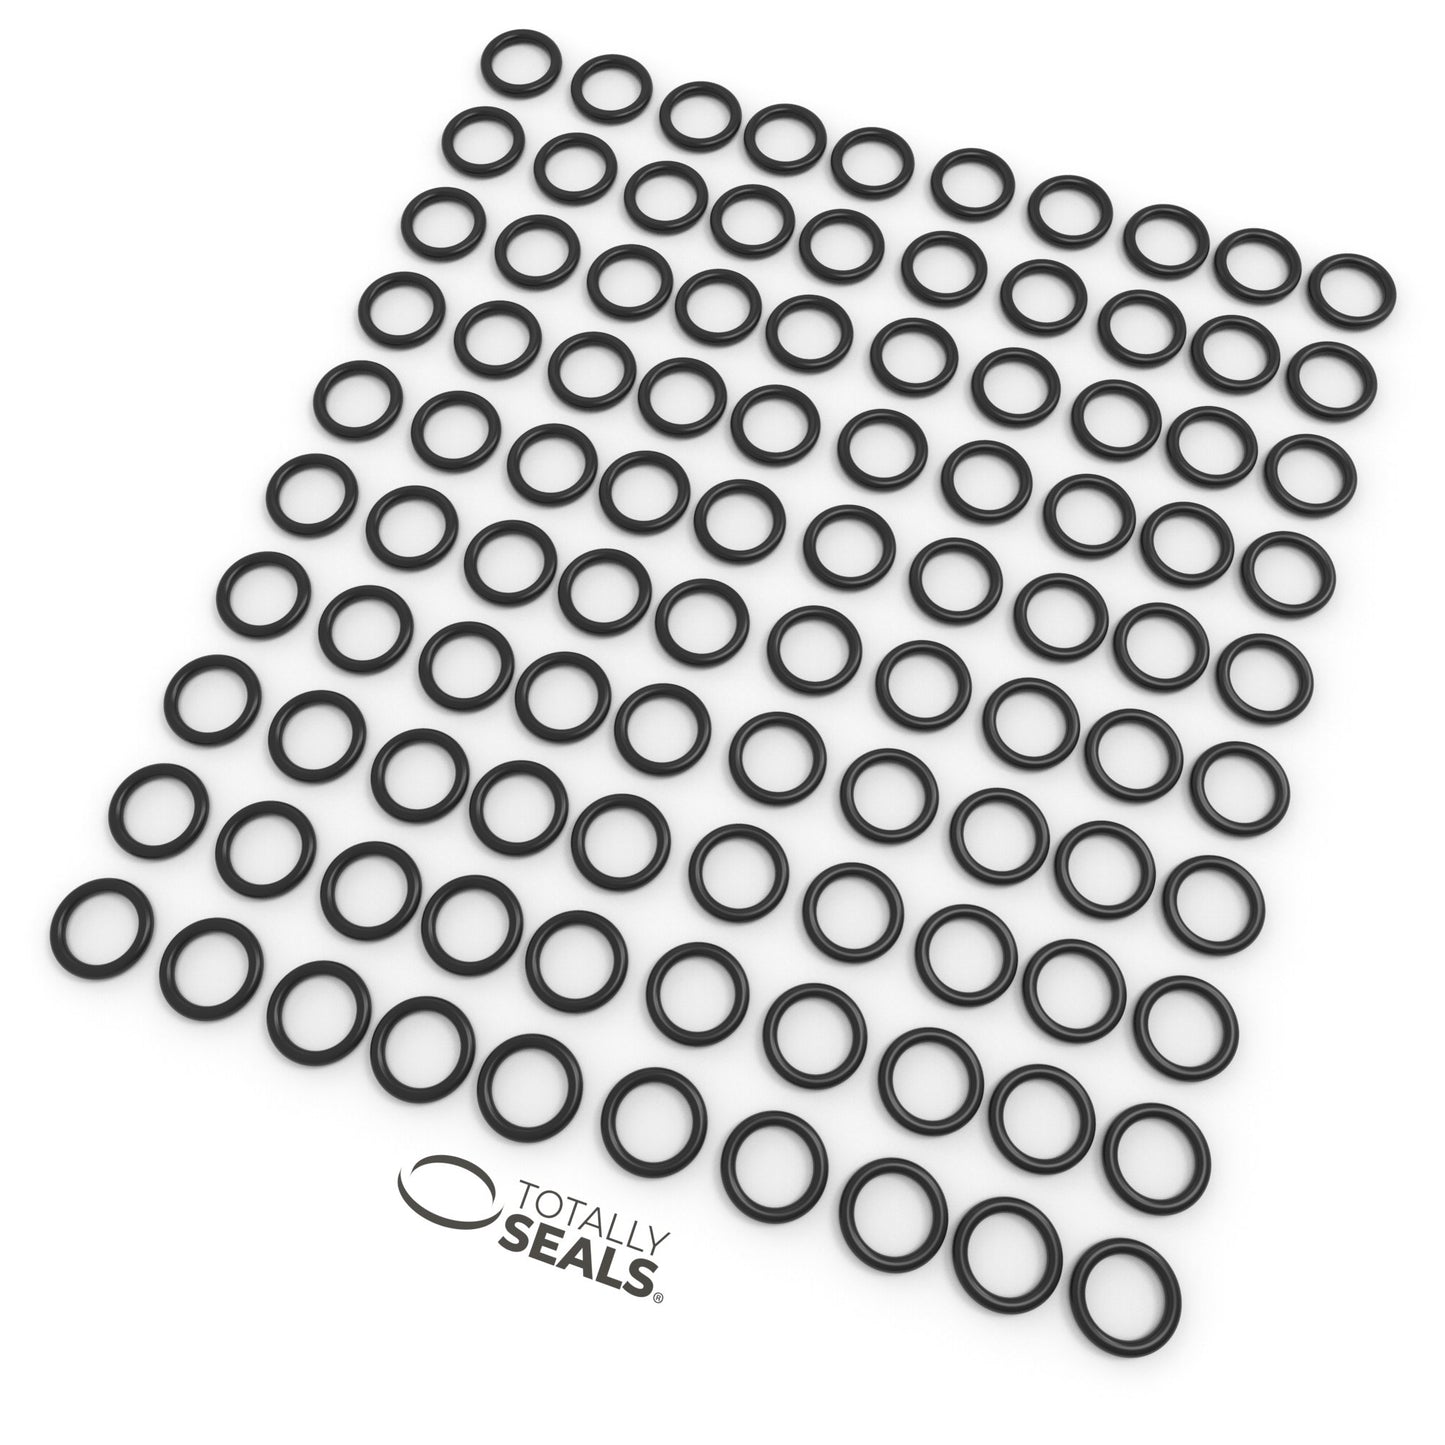 18mm x 2.5mm (23mm OD) Nitrile O-Rings - Totally Seals®